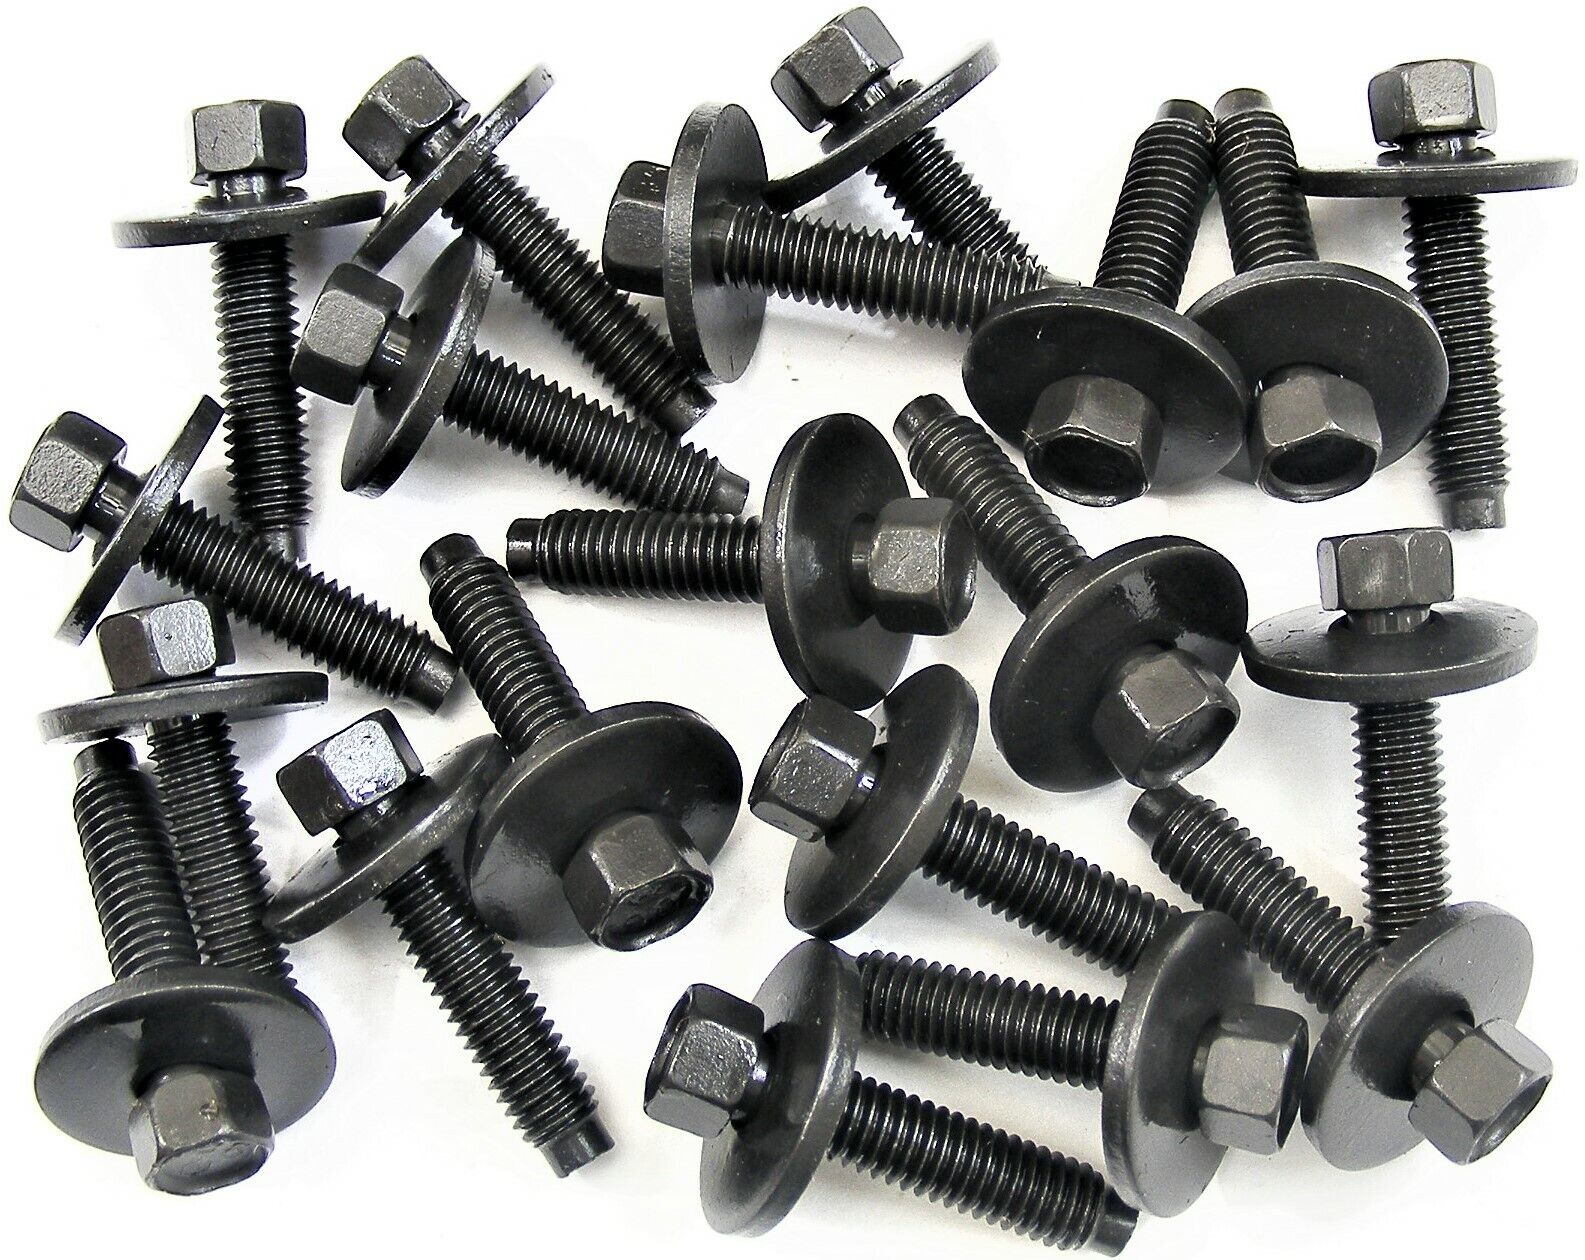 GM Truck Body Bolts- M6-1.0 x 28mm Long- 8mm Hex- 19mm Washer- 20 bolts- #113